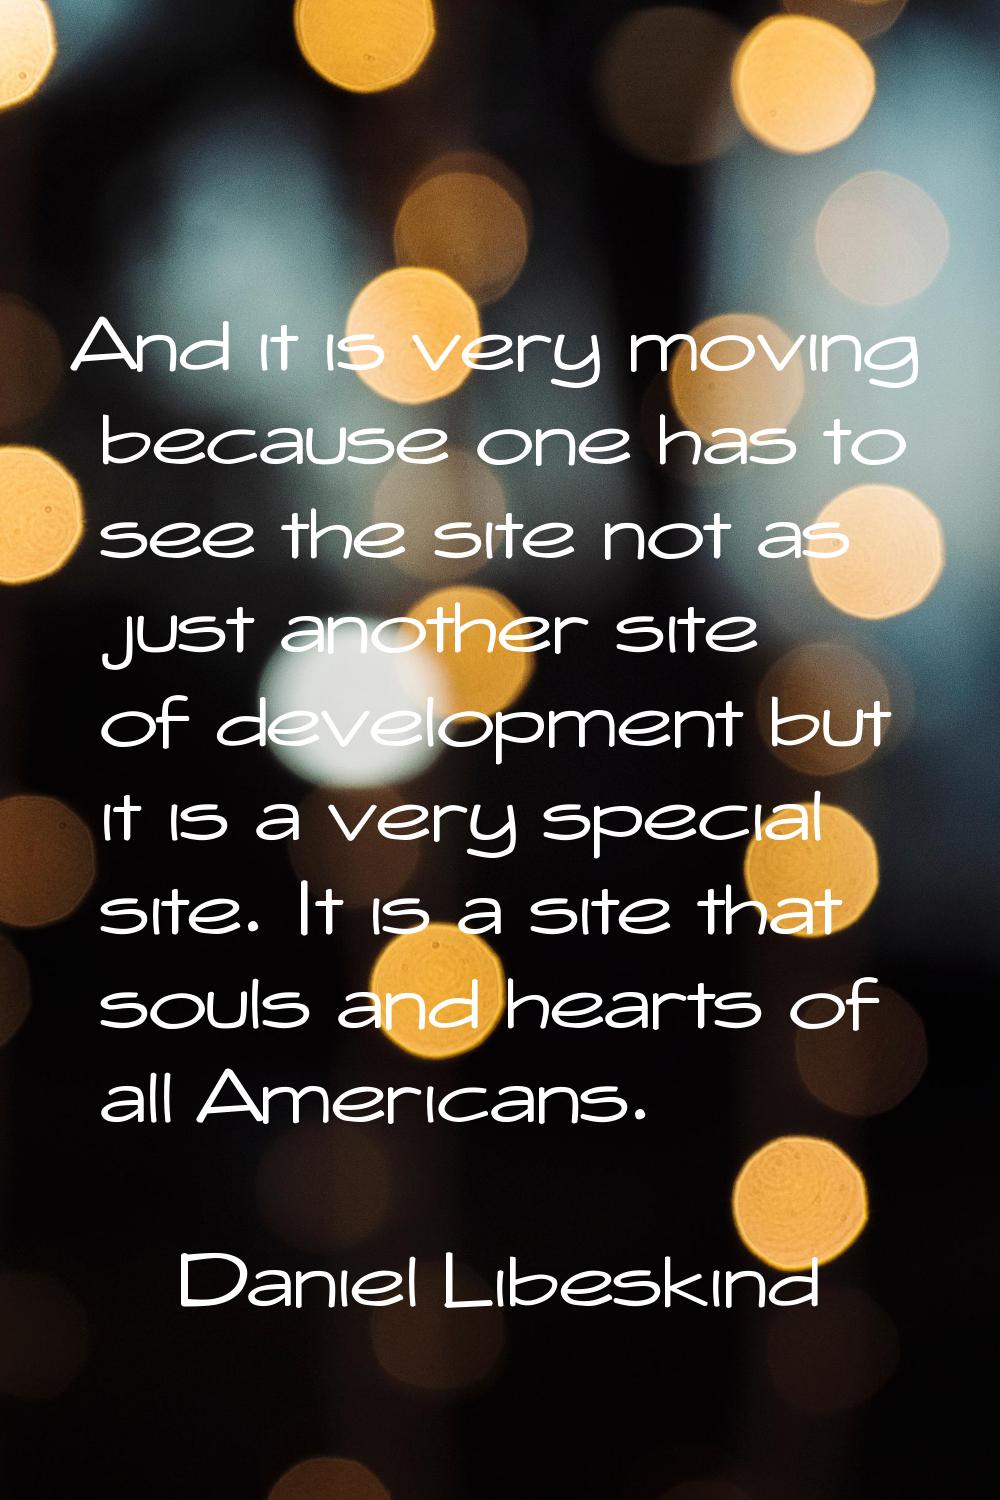 And it is very moving because one has to see the site not as just another site of development but i